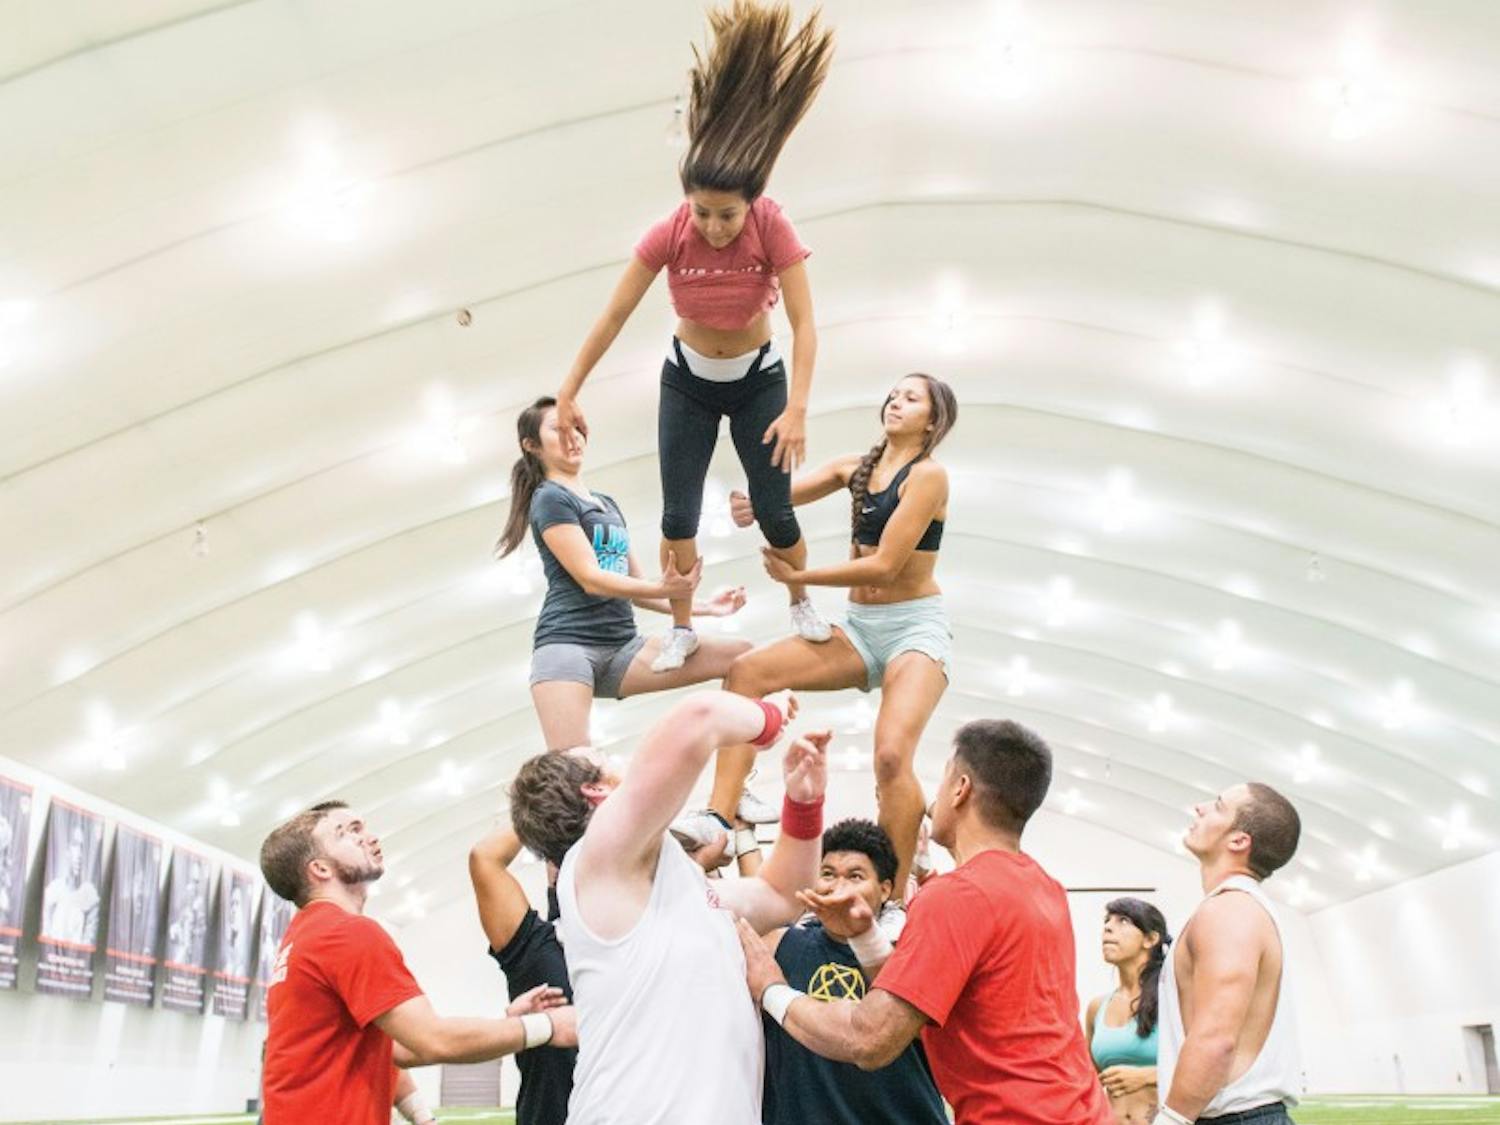 The Large Co-Ed Cheerleading Team practices rewinds at the Football Indoor Practice Facility during an early morning practice. Two of the men, bottom-center, throw the top girl in a backward spin to the middle women, center, for the catch while the bases brace under the weight and spotters ensure the safety of all involved.